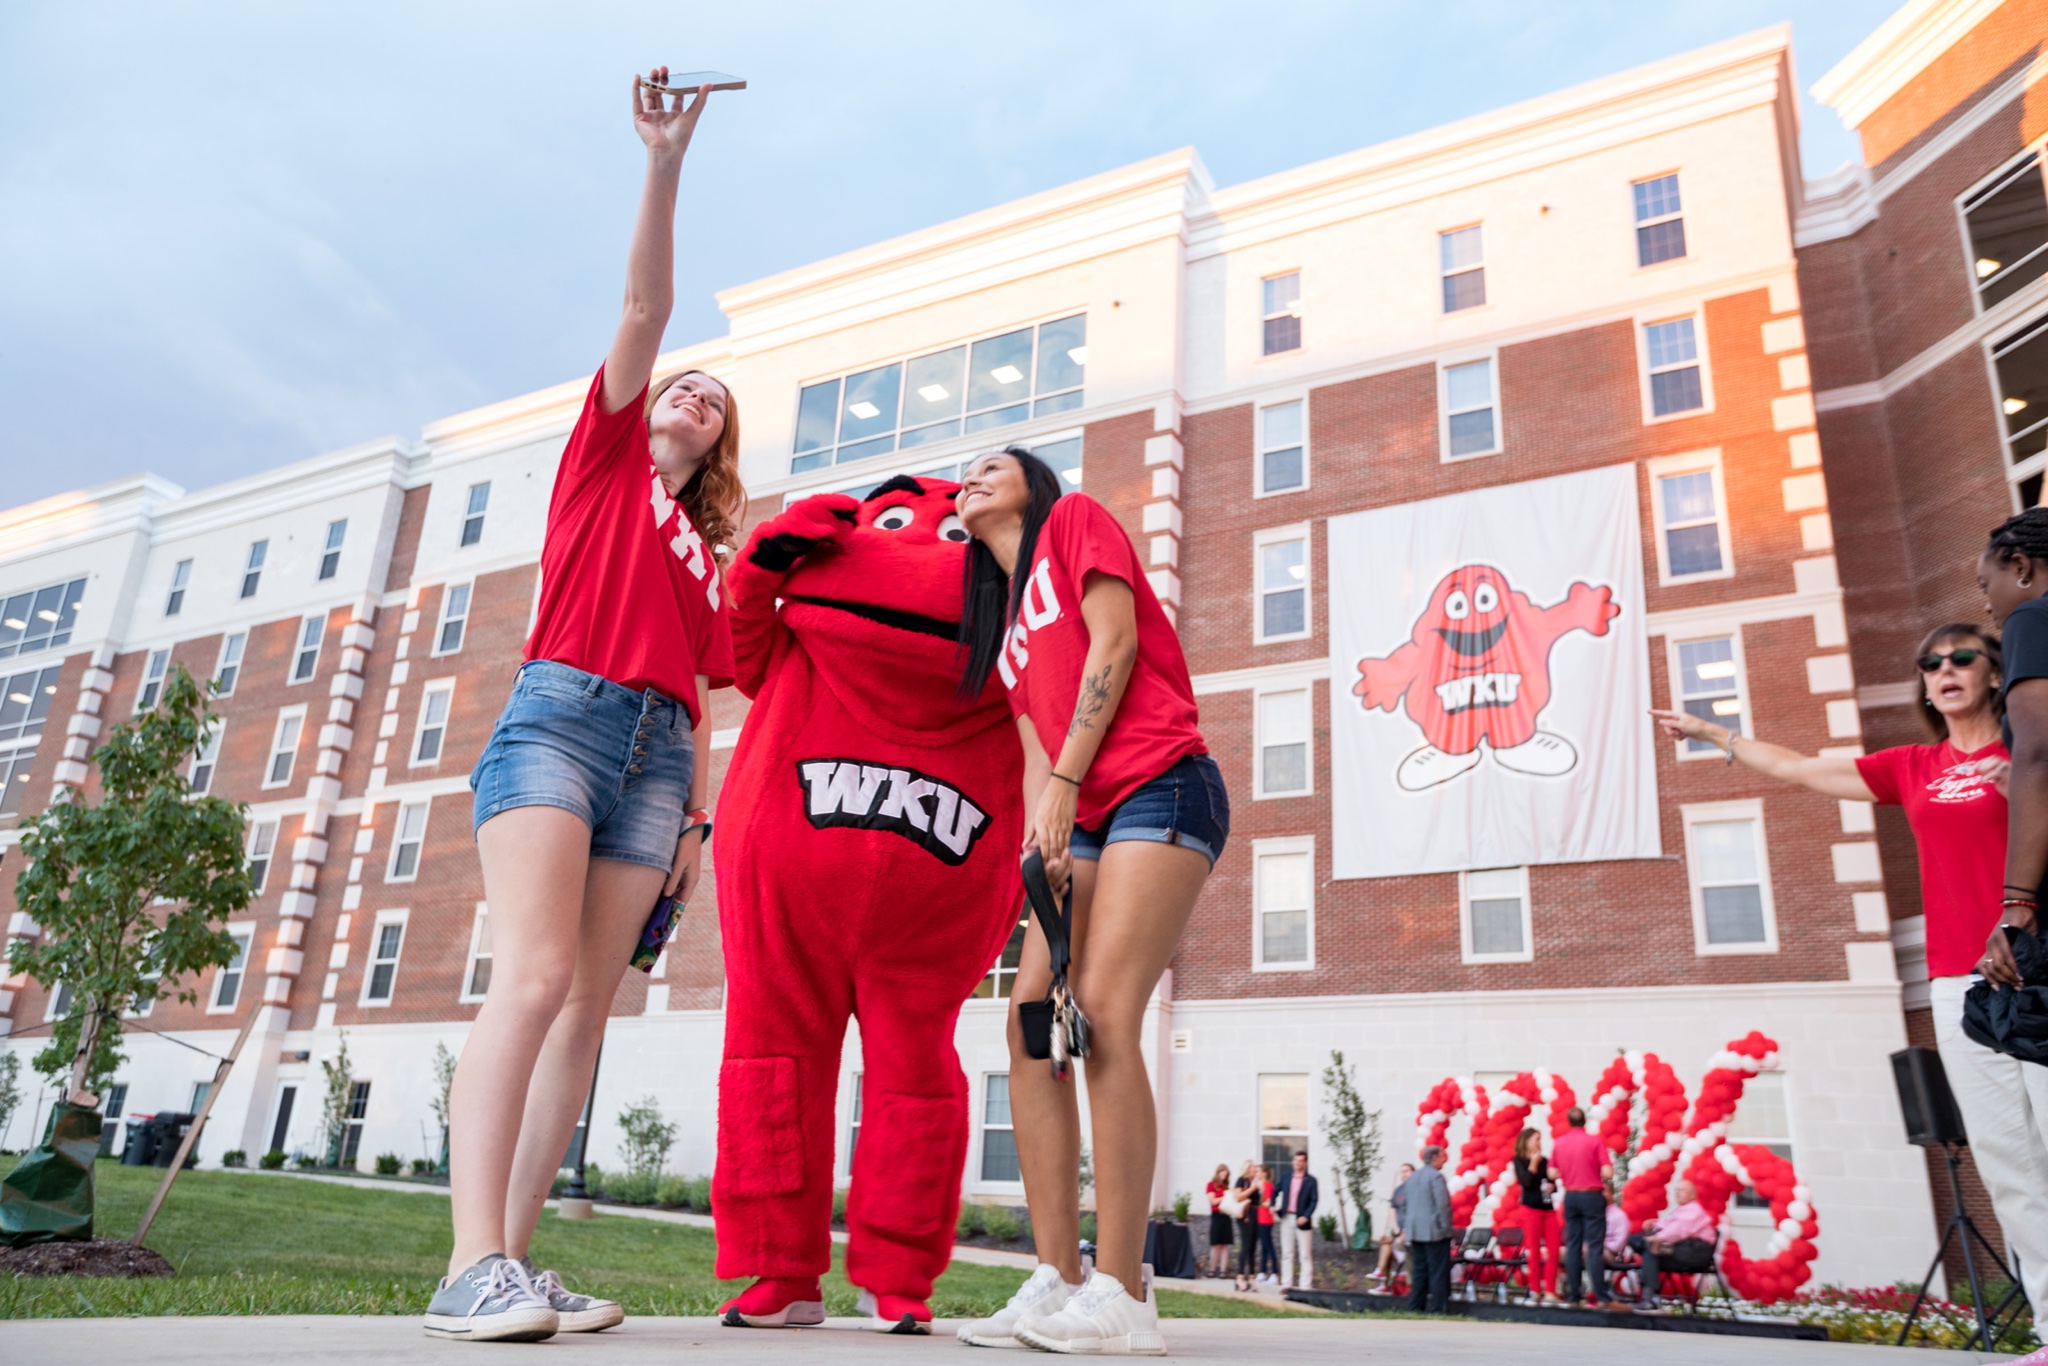 WKU Admissions planning student recruitment events